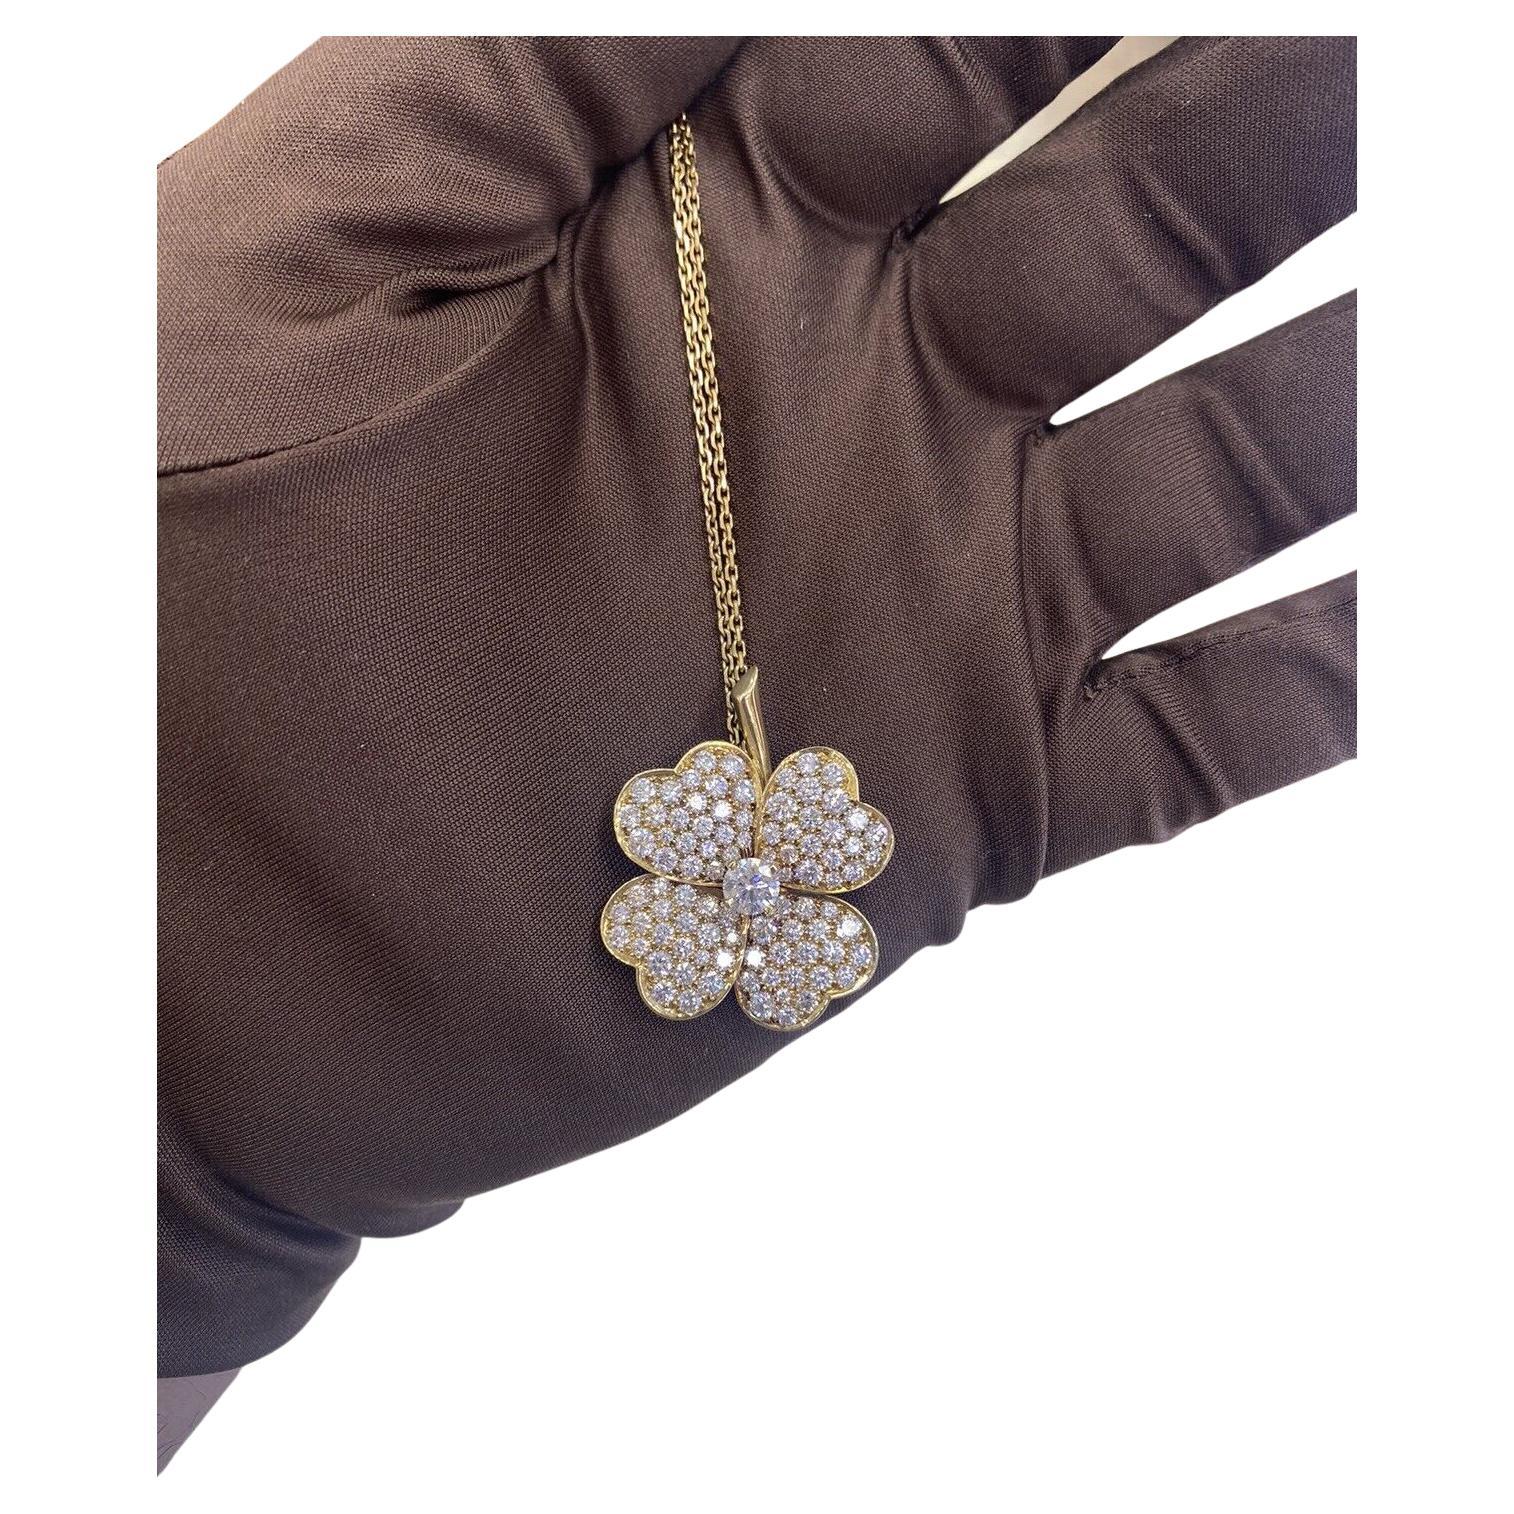 Authentic Van Cleef & Arpels Cosmos Diamond Pendant Large Model Box And Papers For Sale